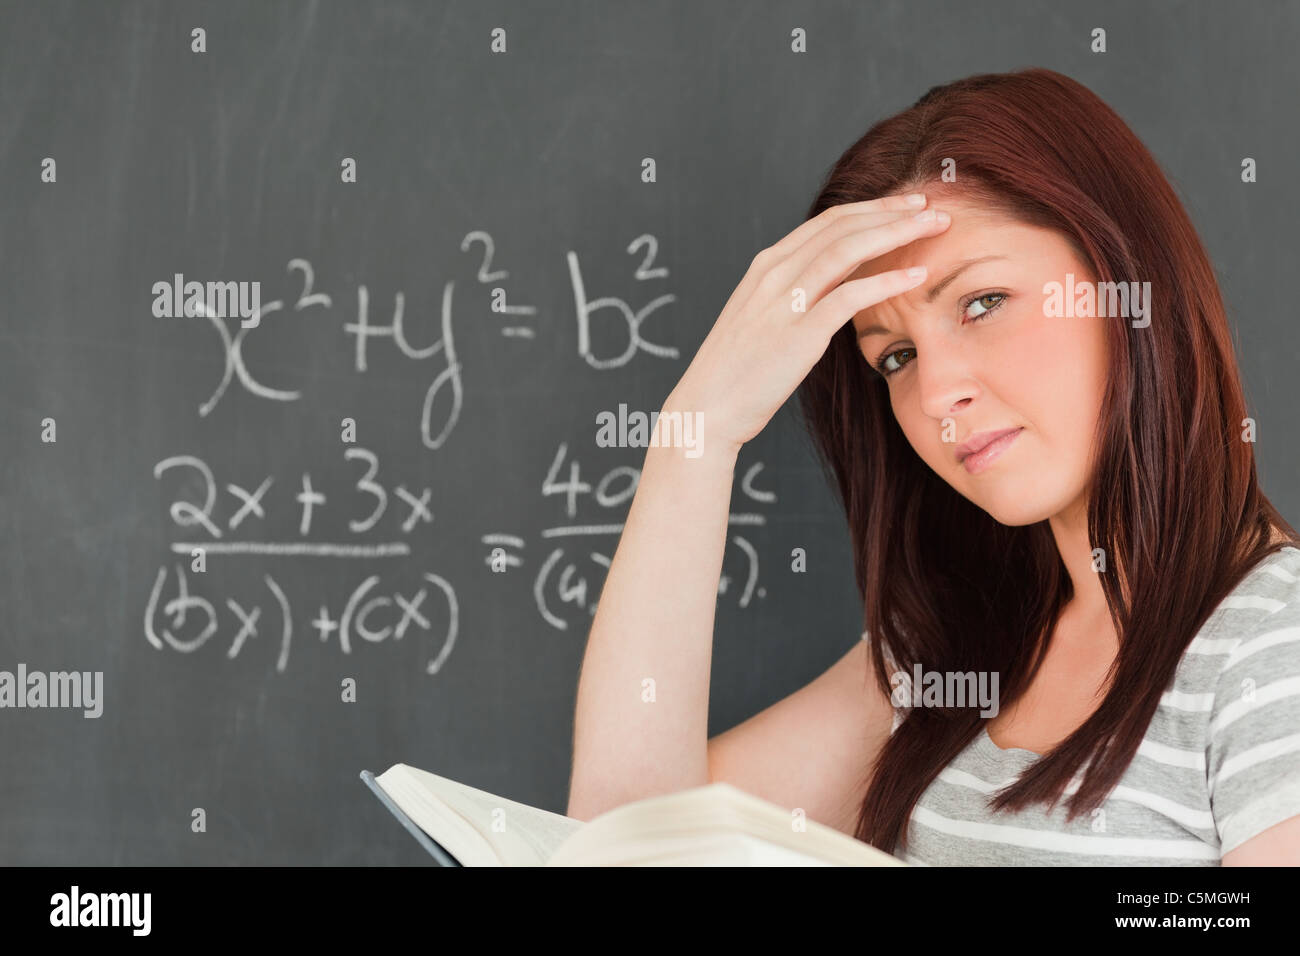 Thoughtful woman trying to solve an equation Stock Photo